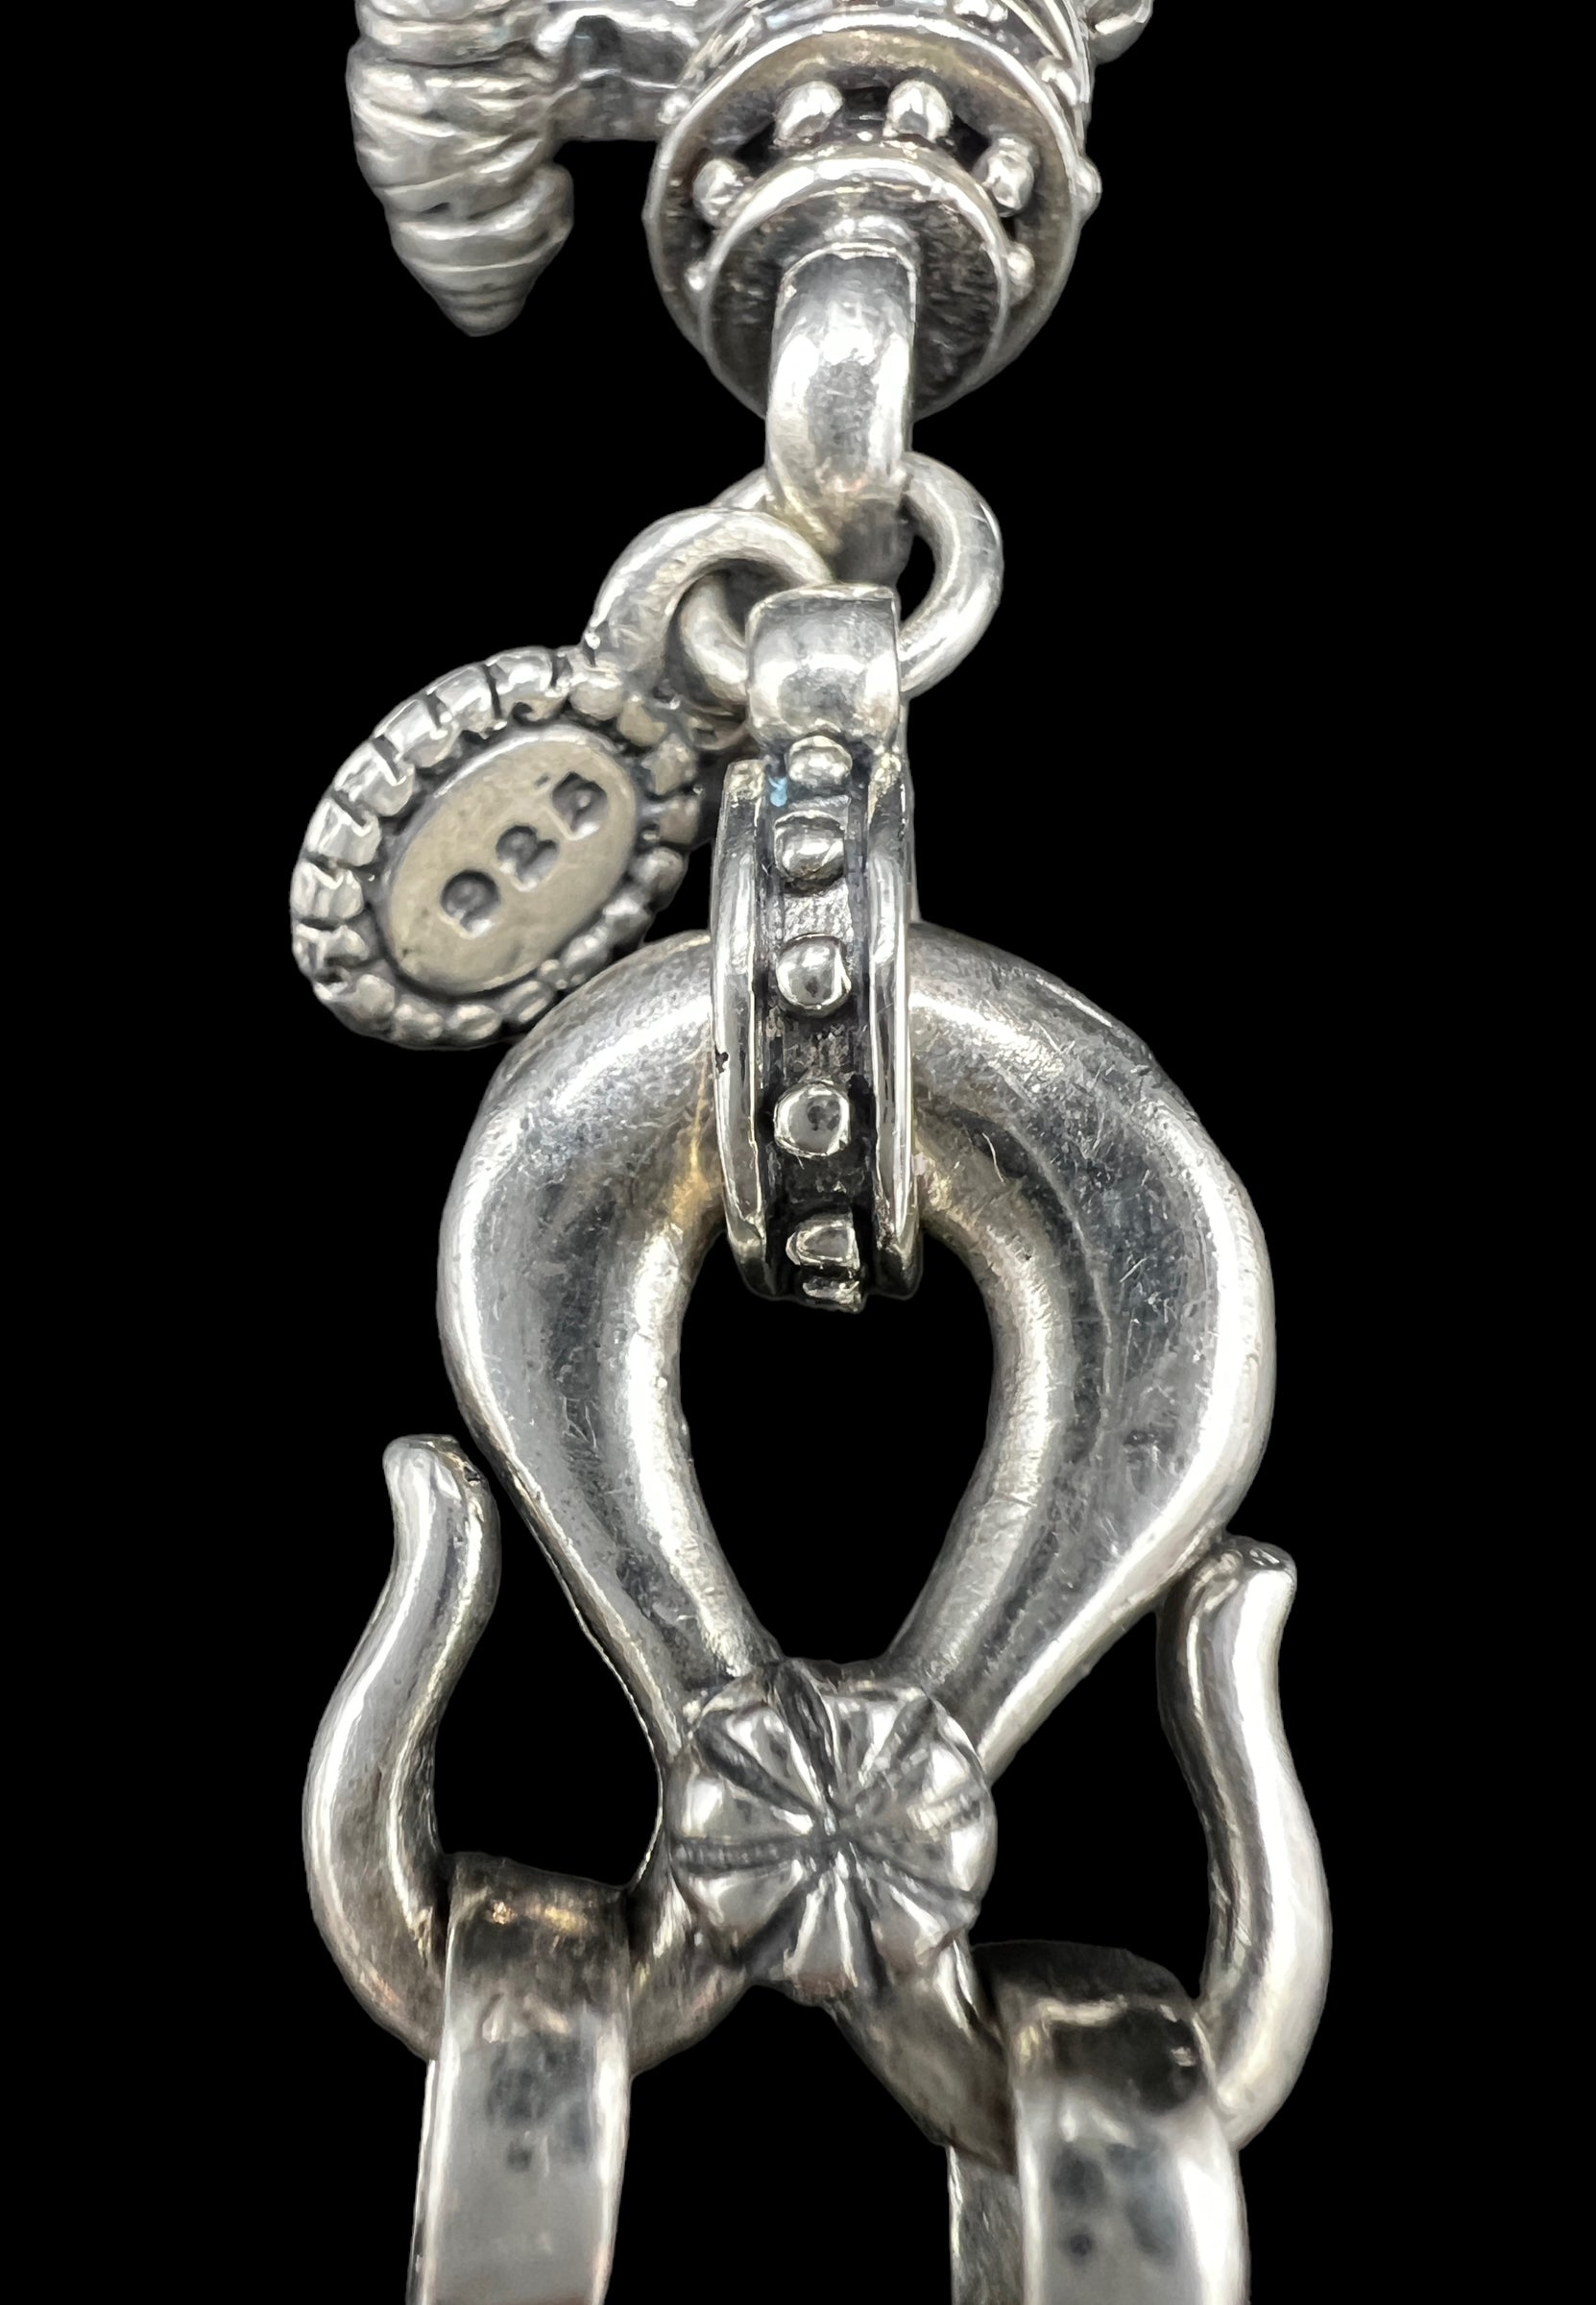 Sterling Silver Keychain/Purse Charm | Signed BC Bowman Originals